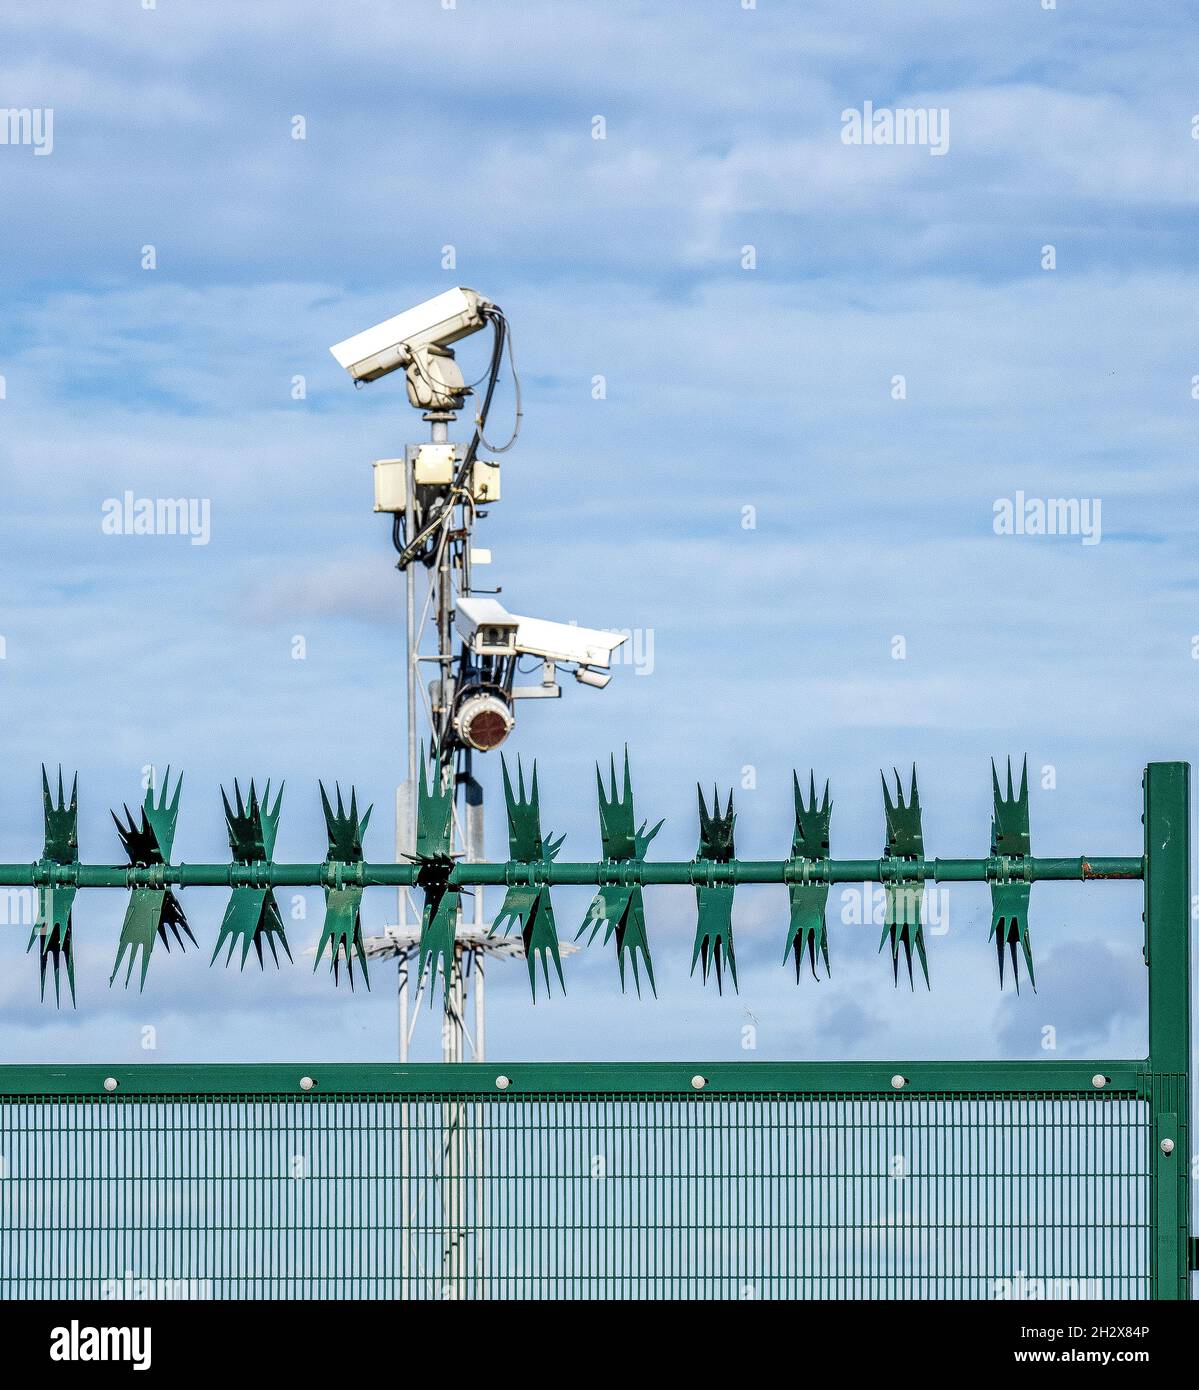 Bank of security cameras and fence with rotating spikes guarding an enclosed site in the UK Stock Photo